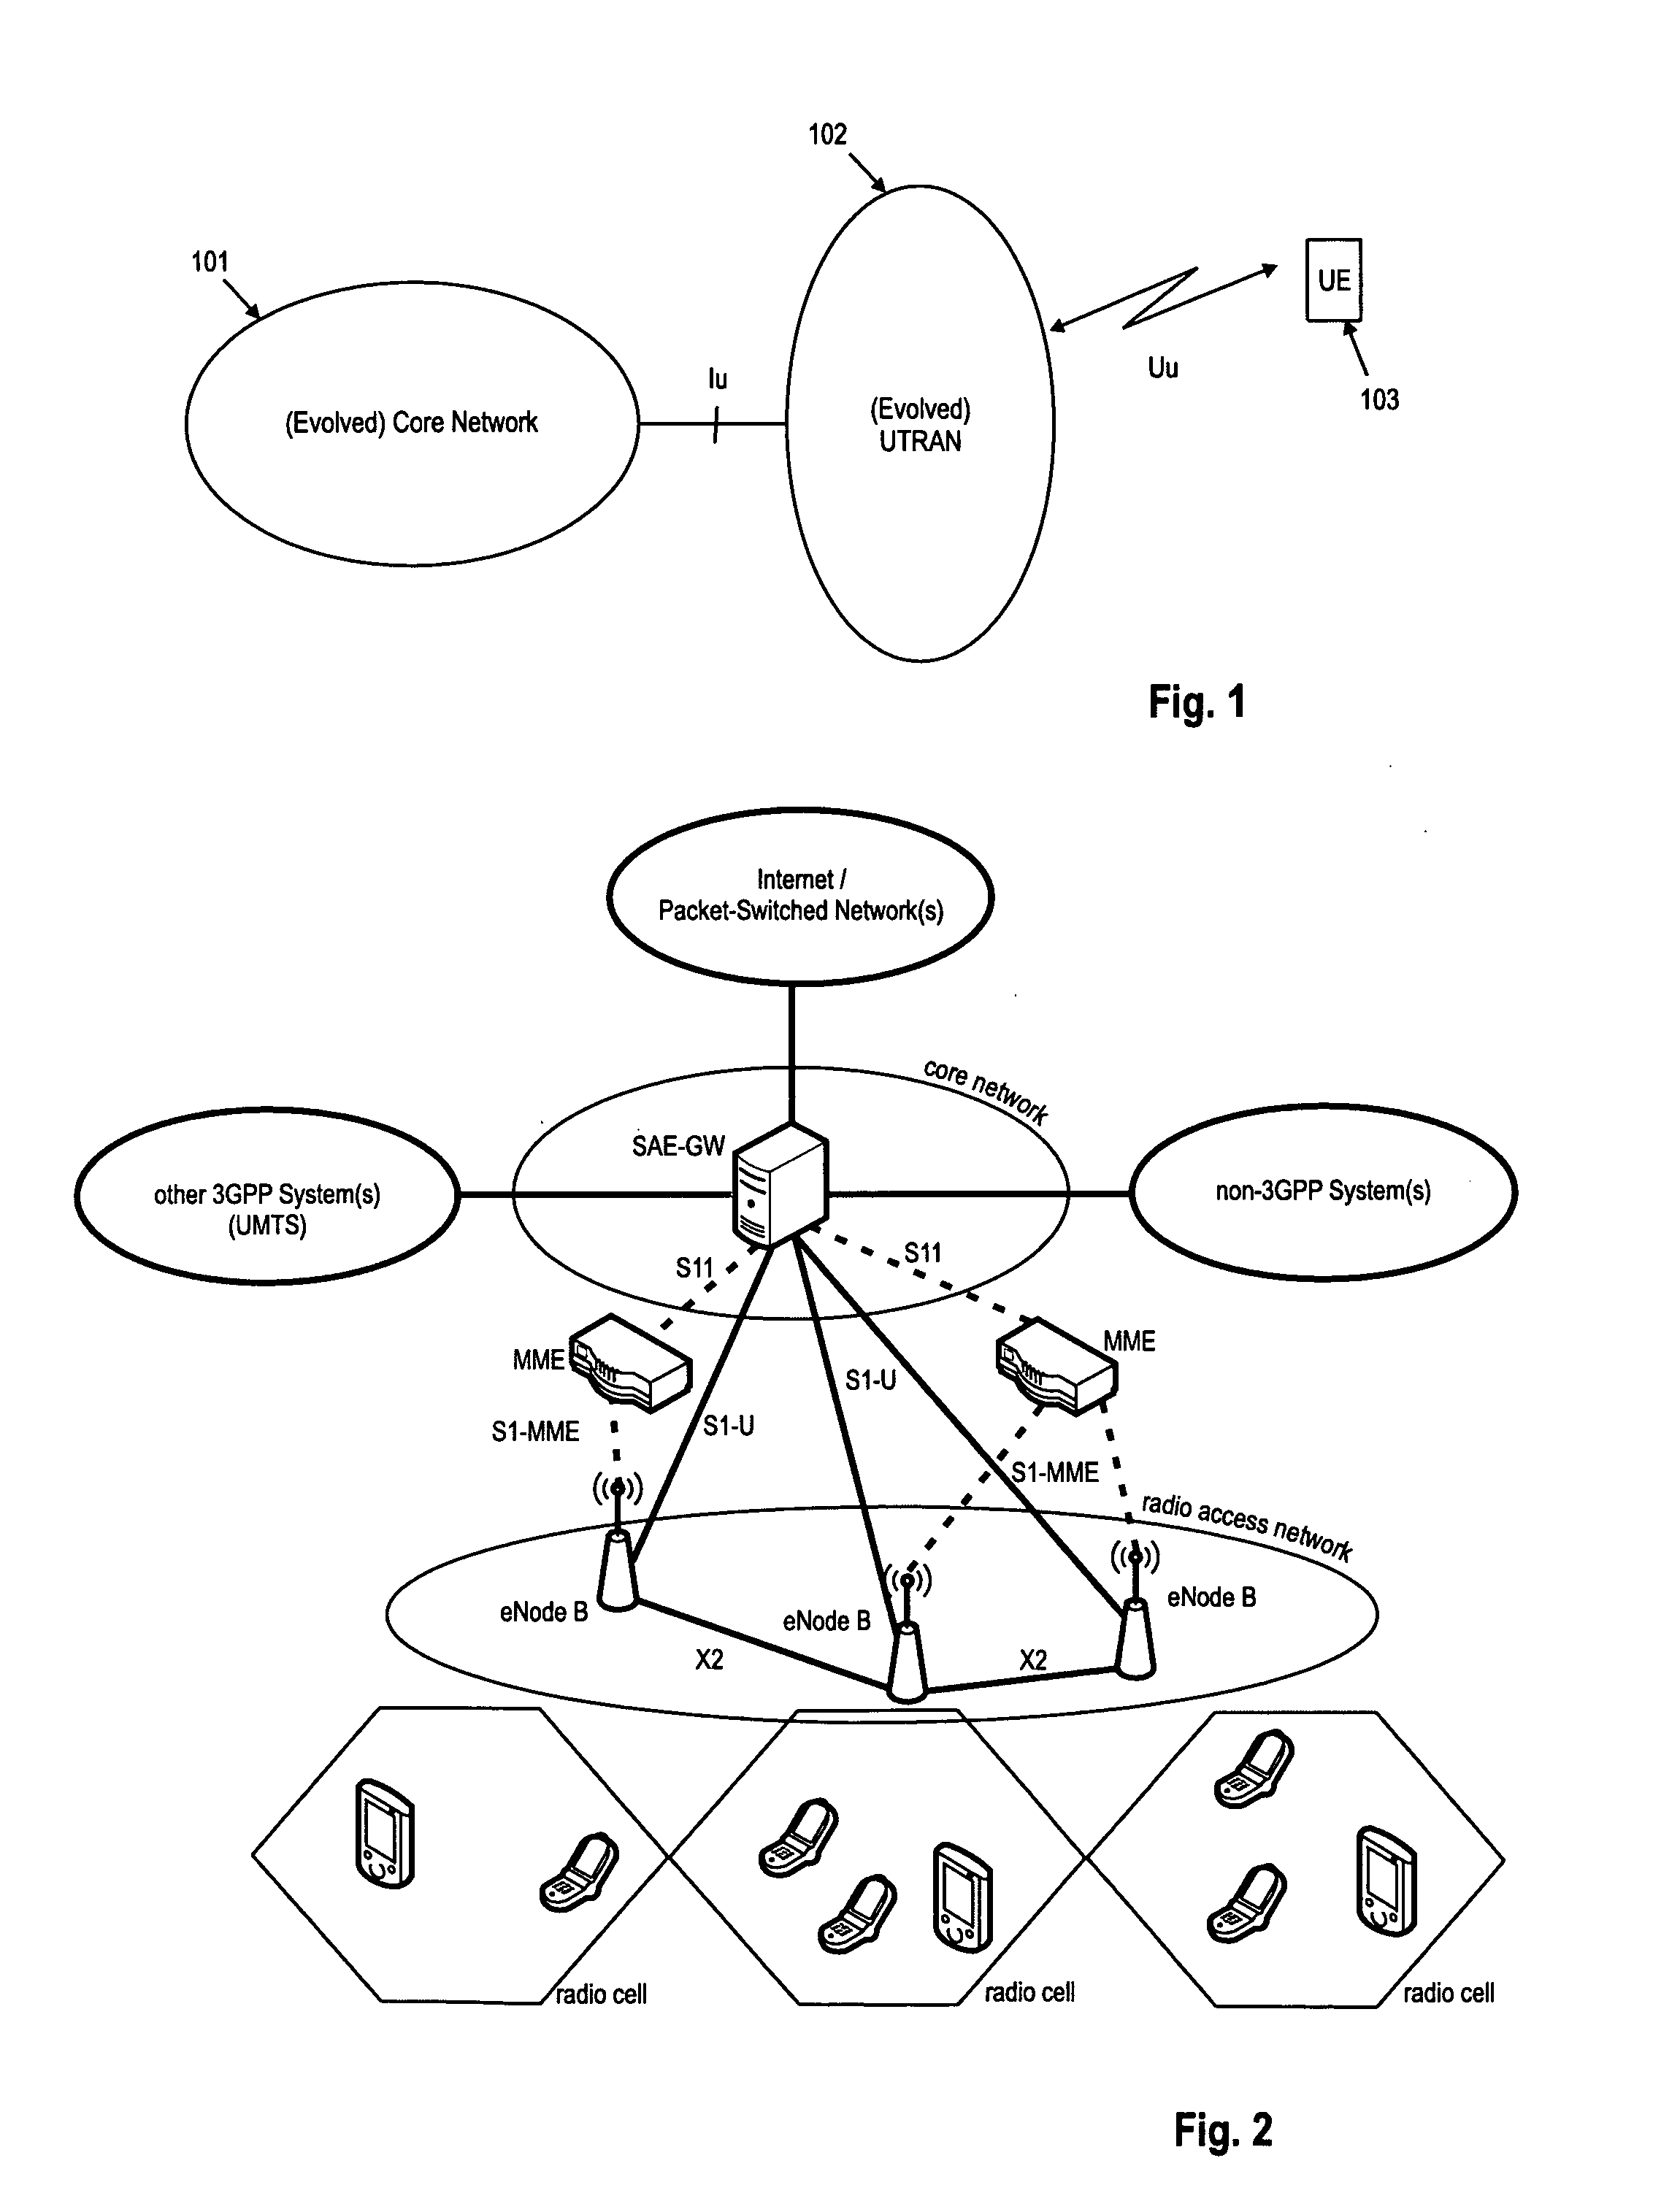 Service content synchronization of multicast data for mobile nodes moving between networks with different radio access technologies